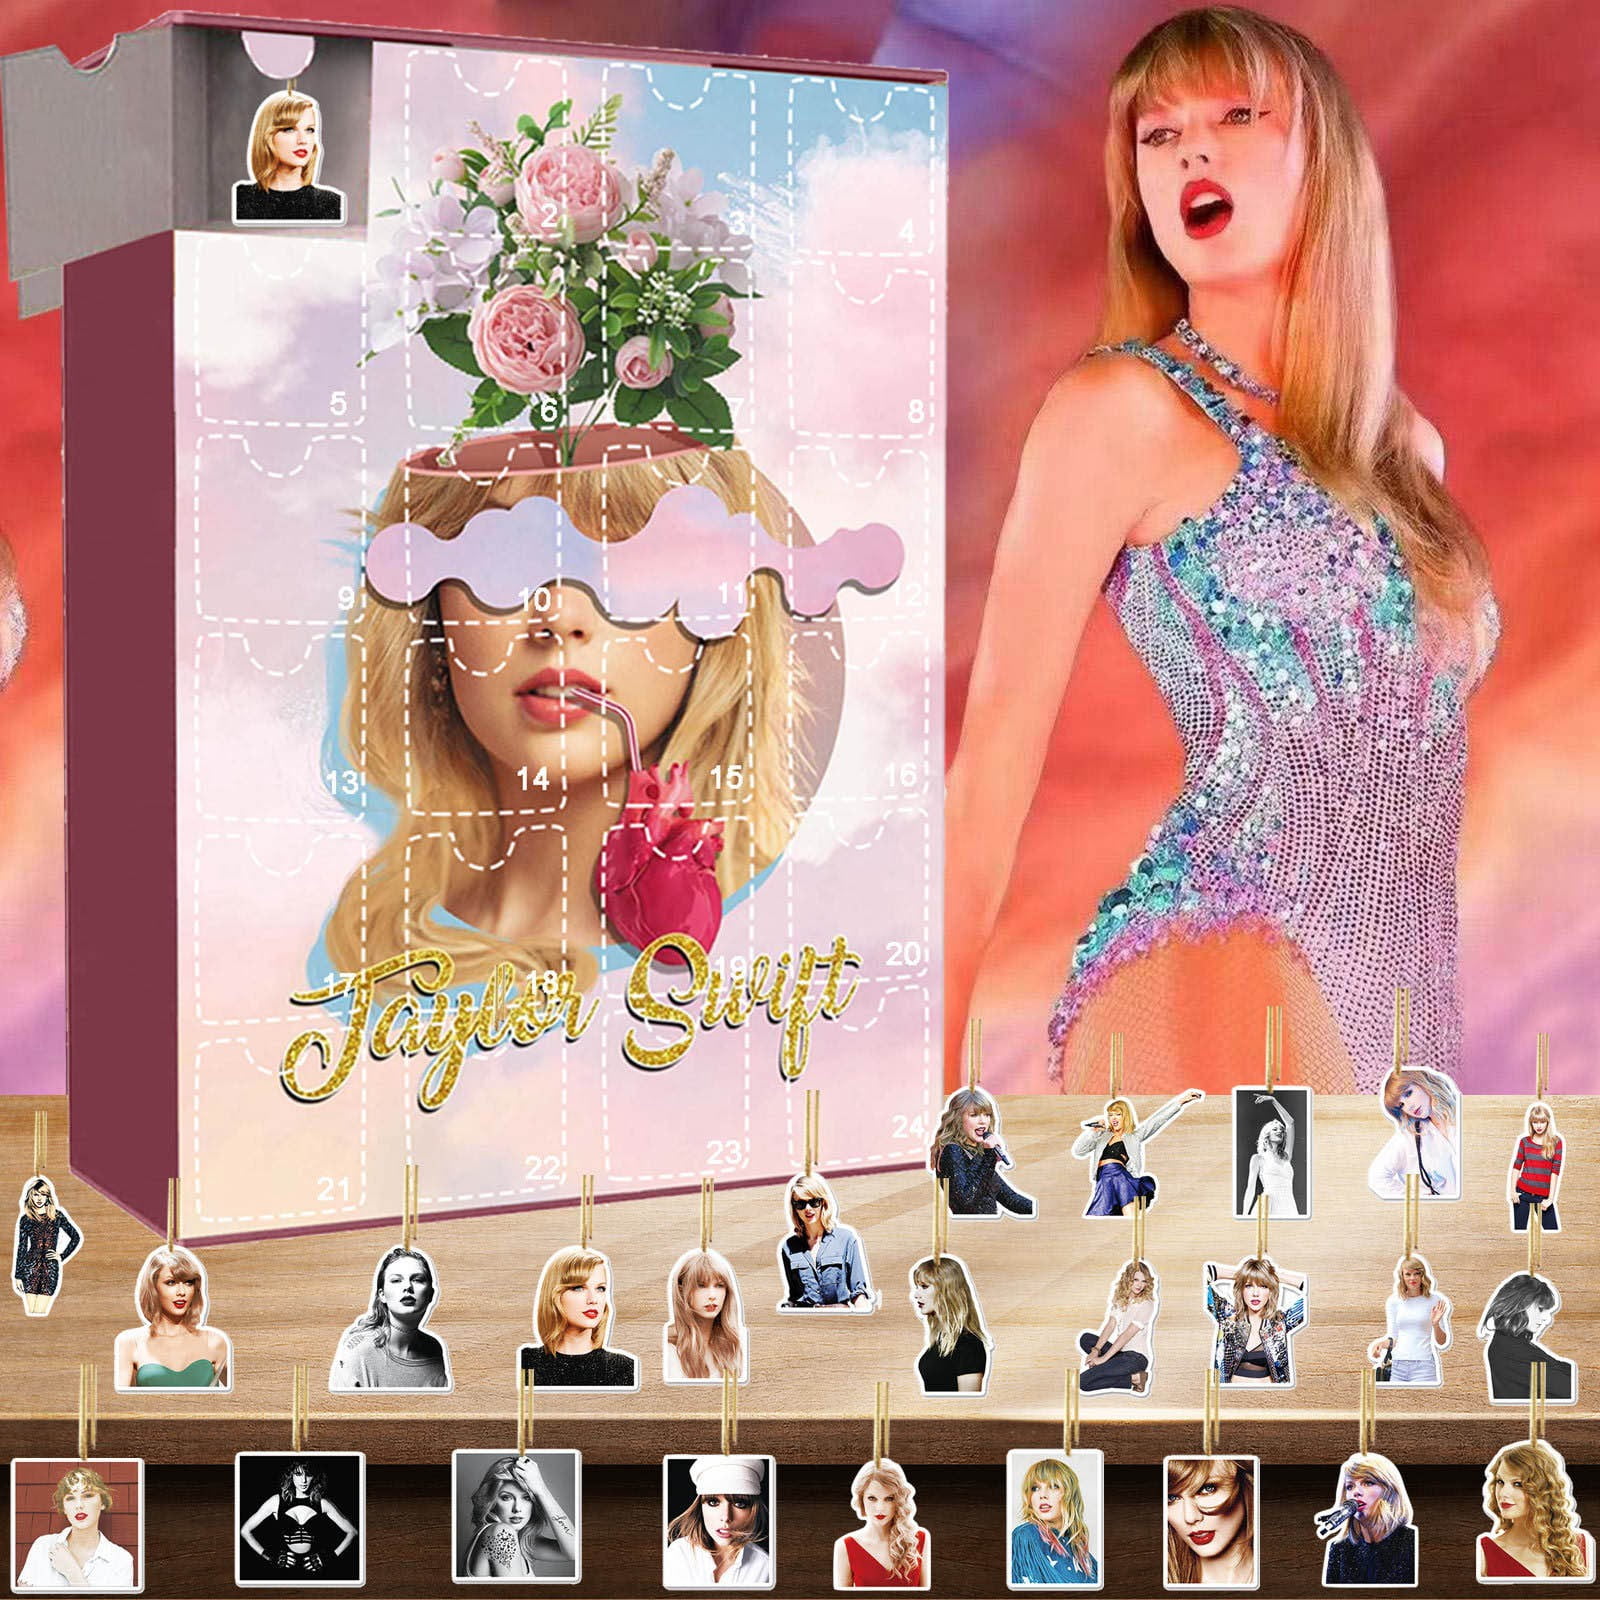 Taylor Swift Fans Gifts - 24 Pieces Taylor Swift Advent Calendar